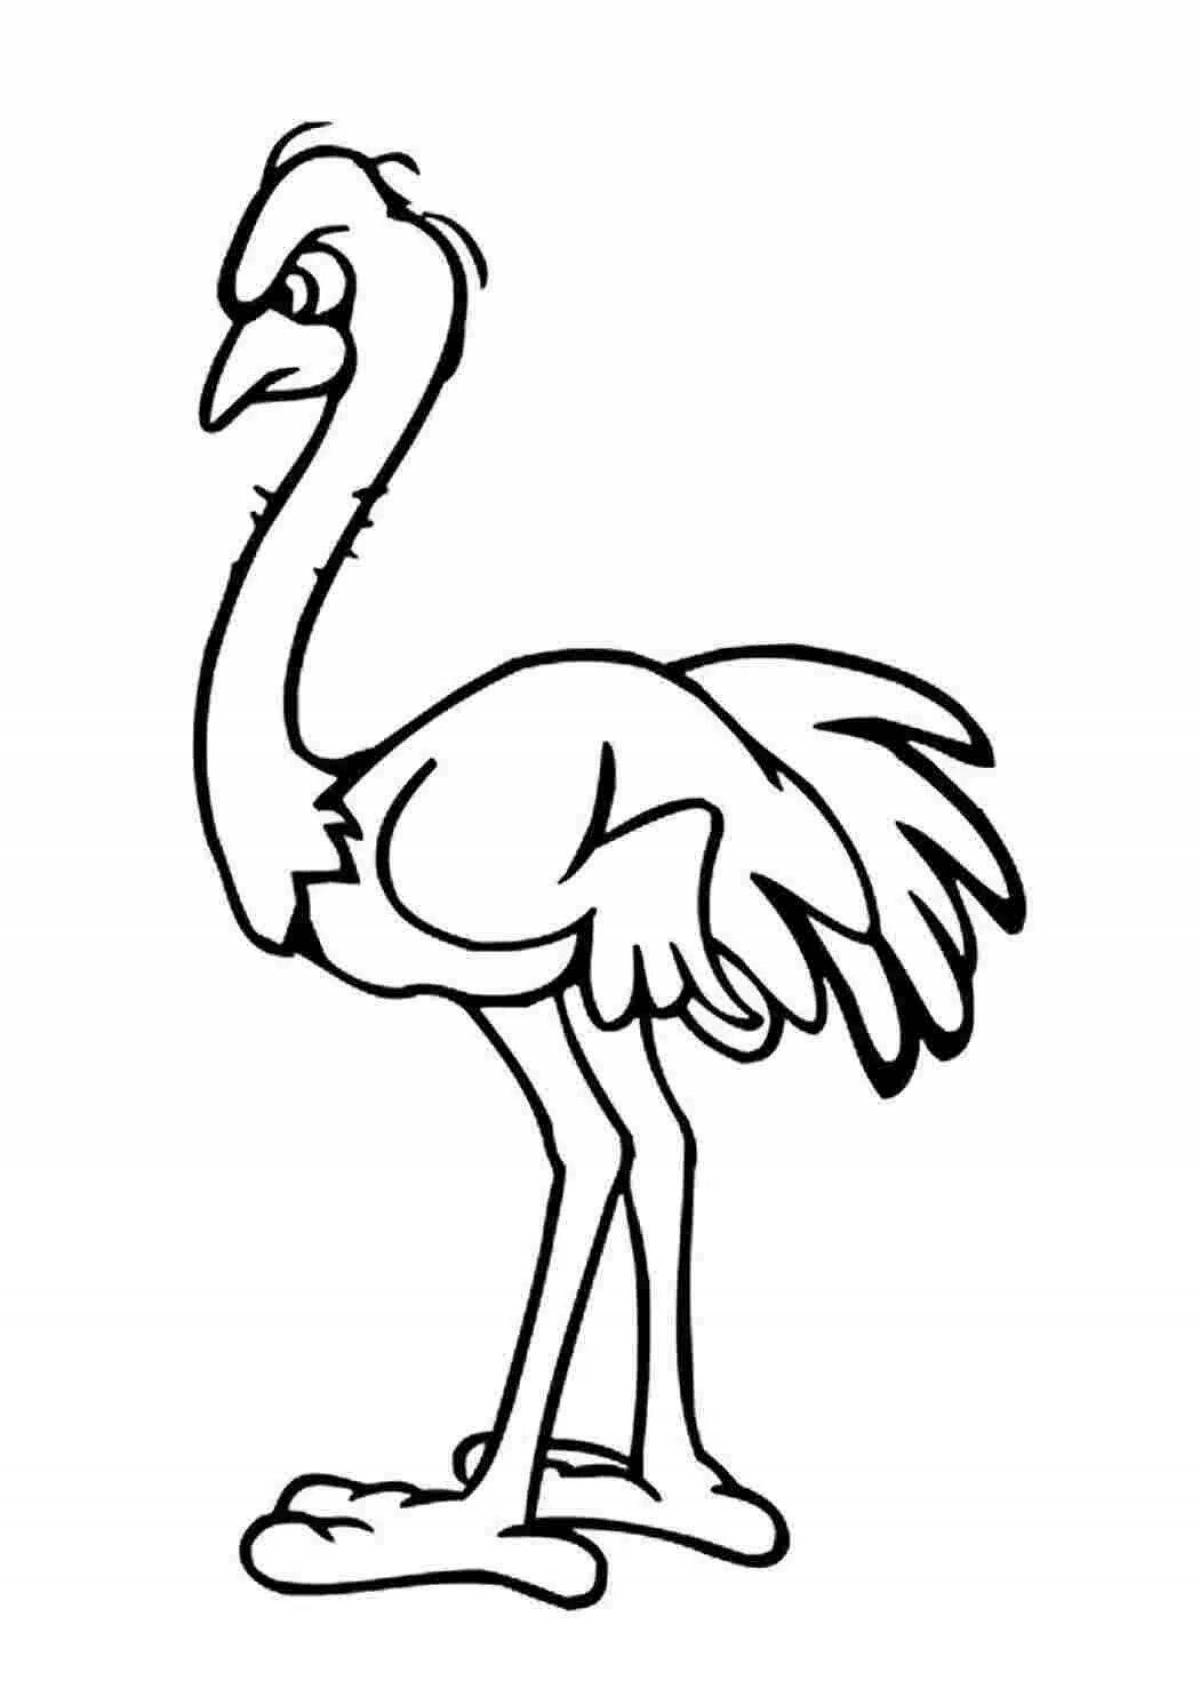 Exquisite ostrich coloring book for kids